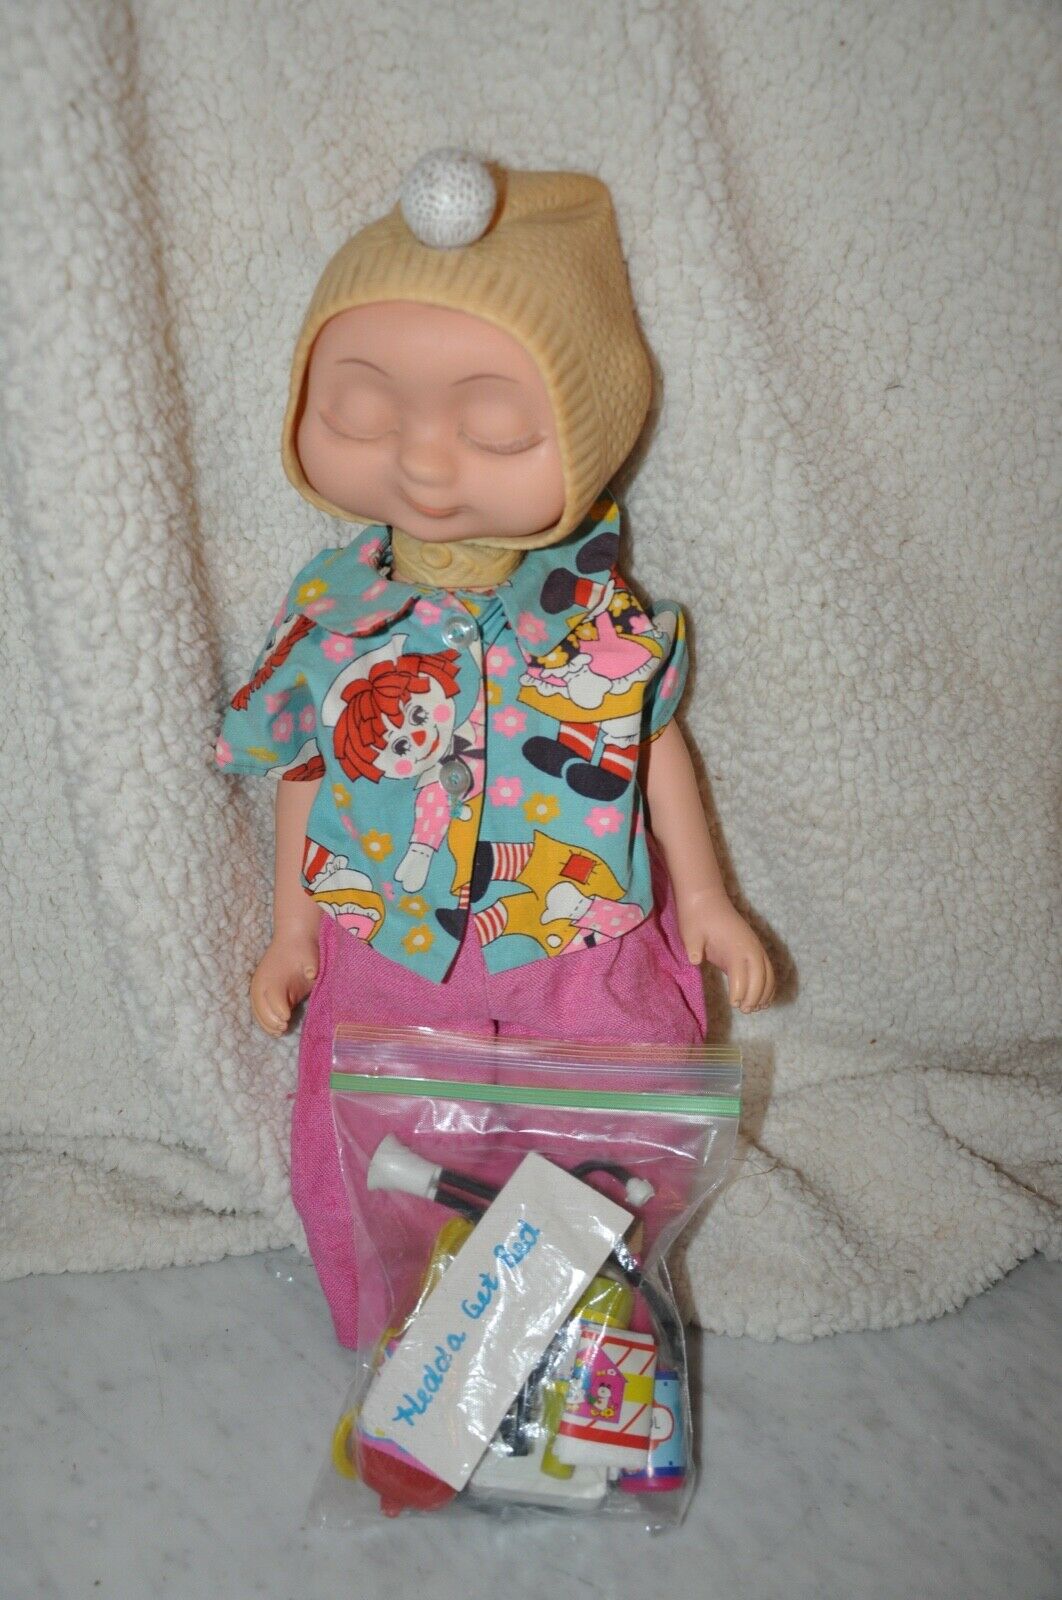 Vintage Hedda Get Bedda Whimsie 1960 American Character Doll 3 Faces With Access